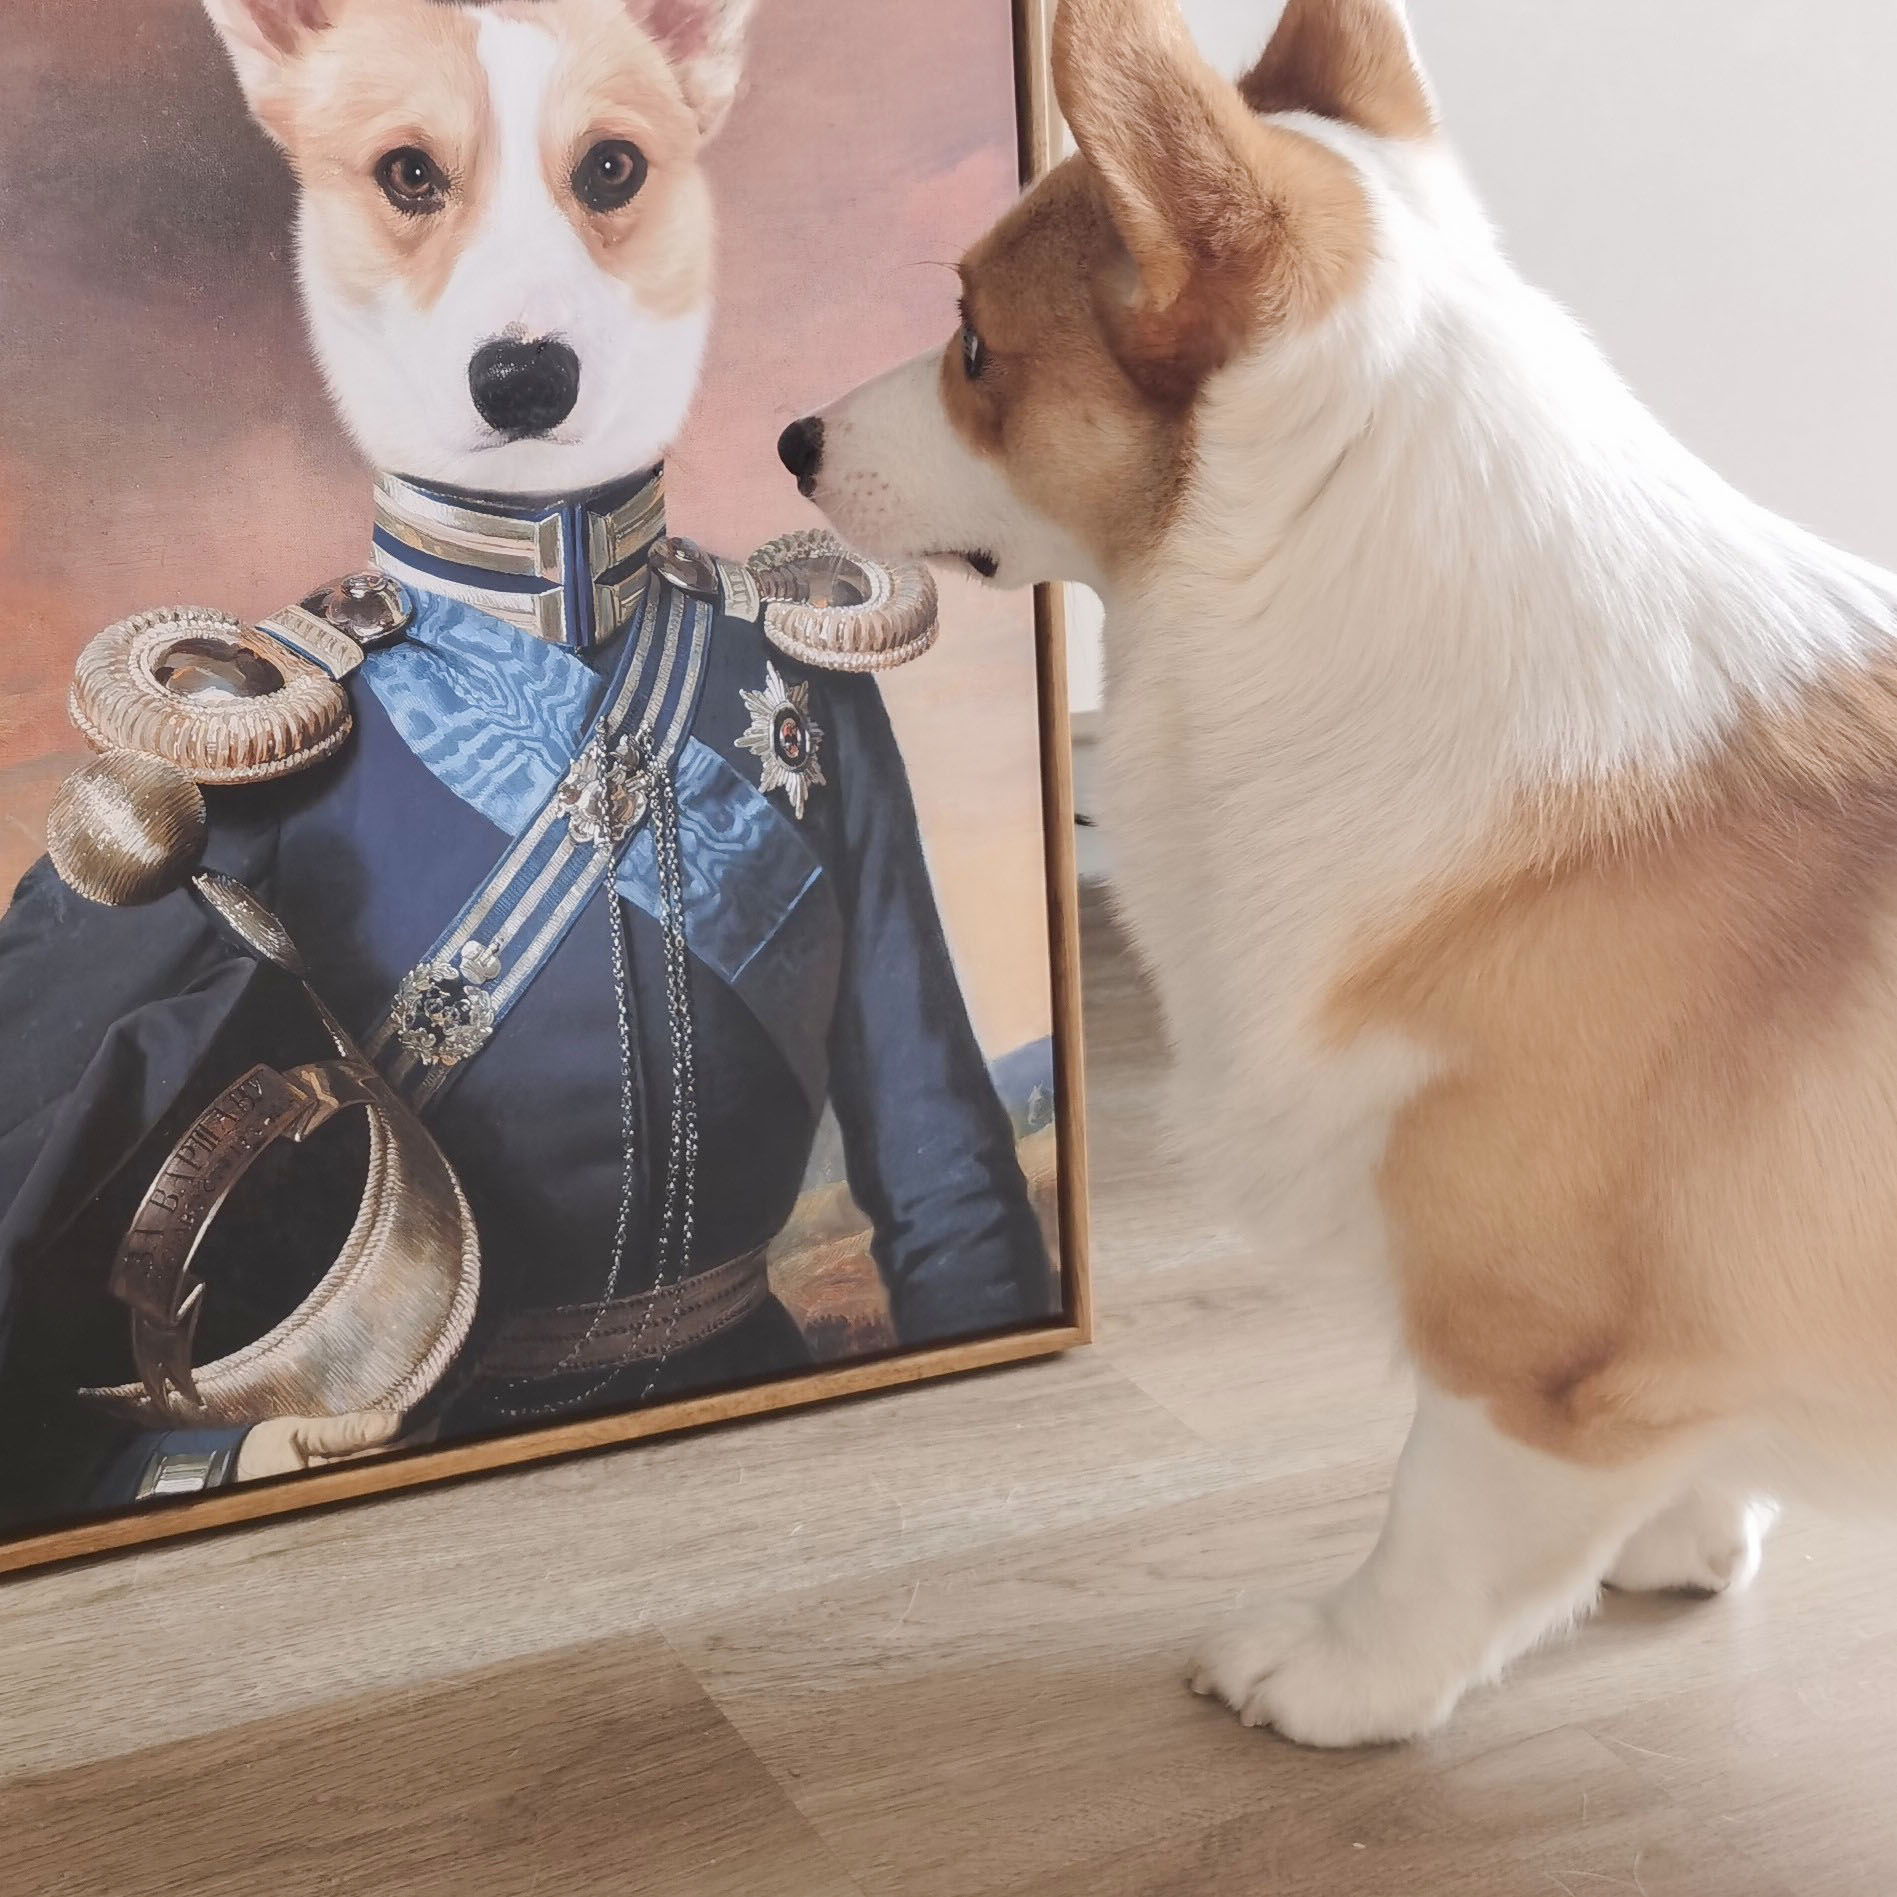 Corgi dog and his portrait in royal general costume